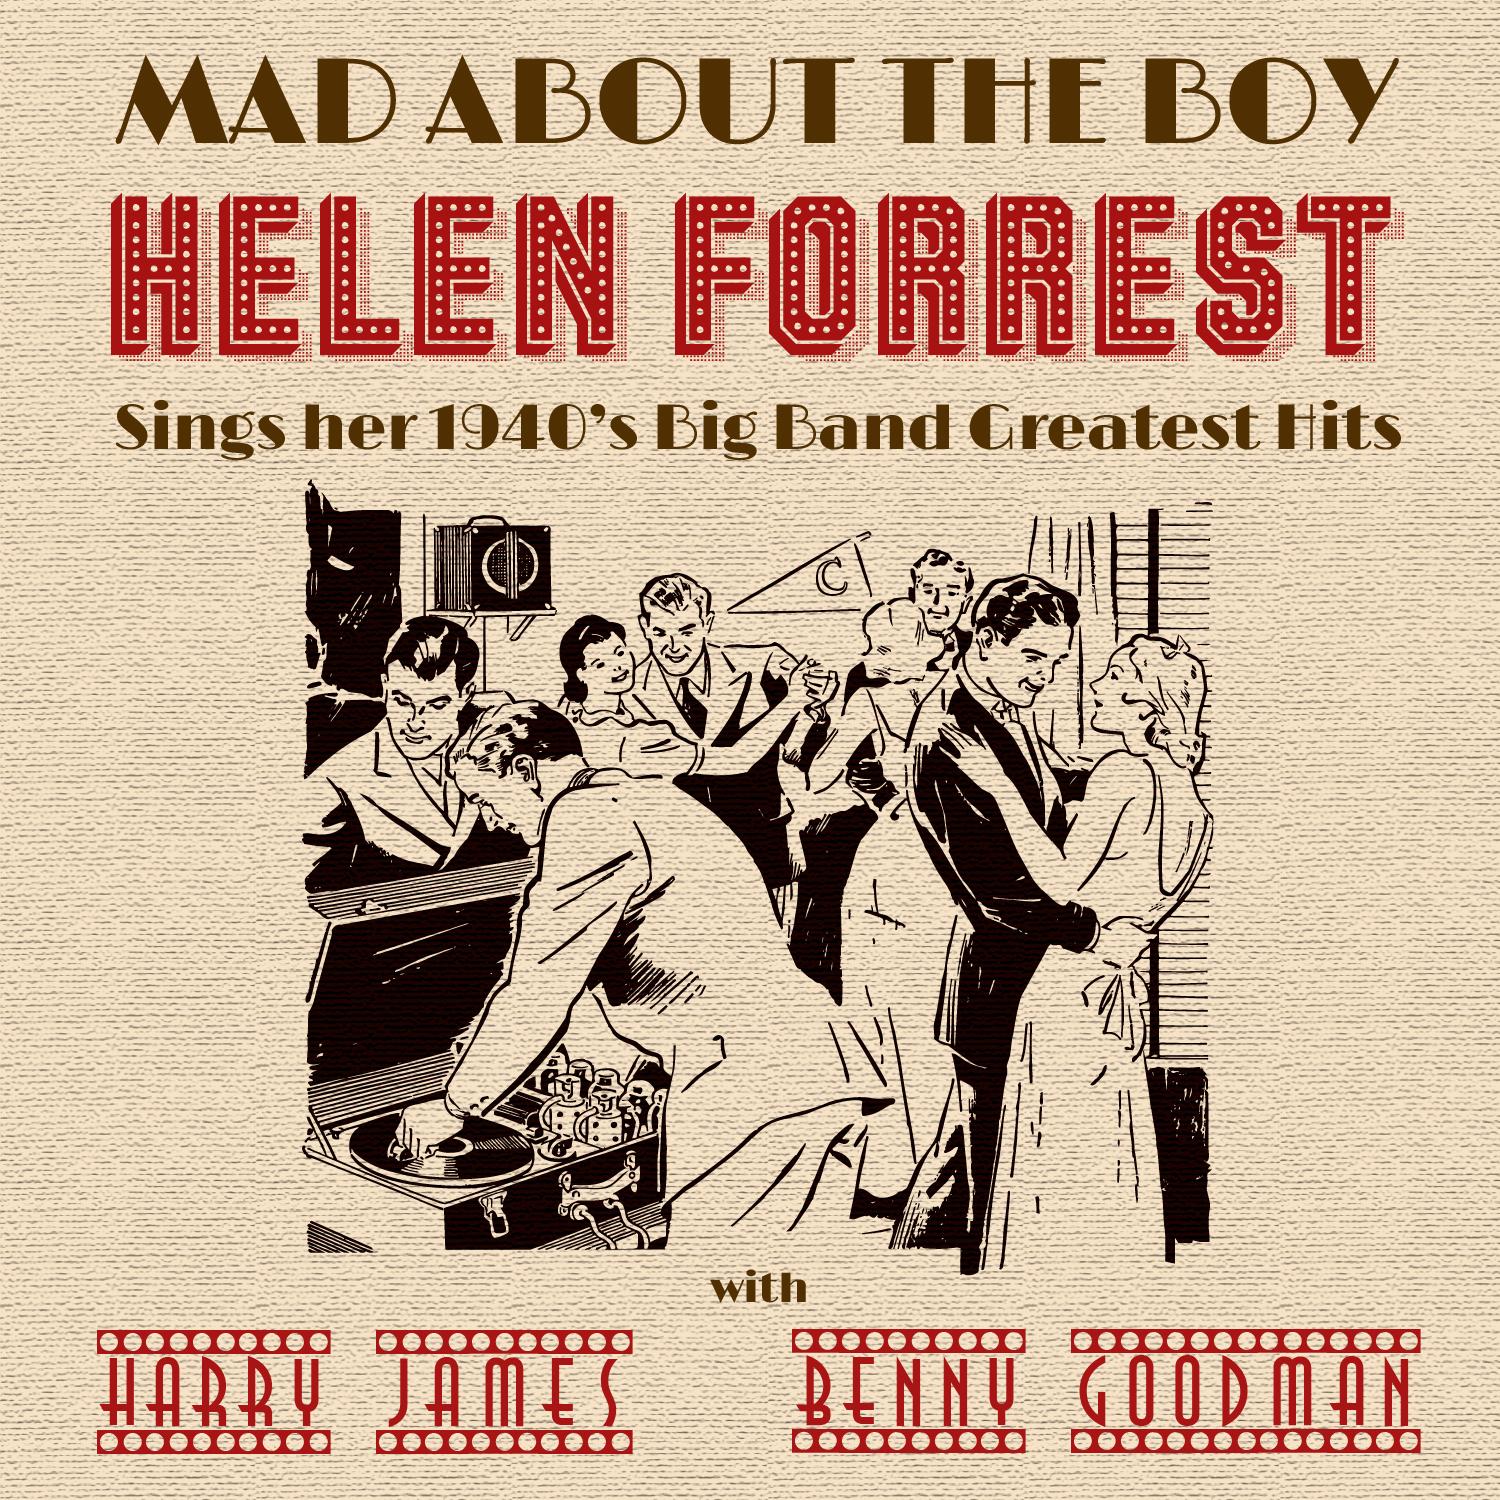 Mad About the Boy: Helen Forrest Sings Her 1940's, Big Band Greatest Hits with Harry James, Benny Goodman, & More